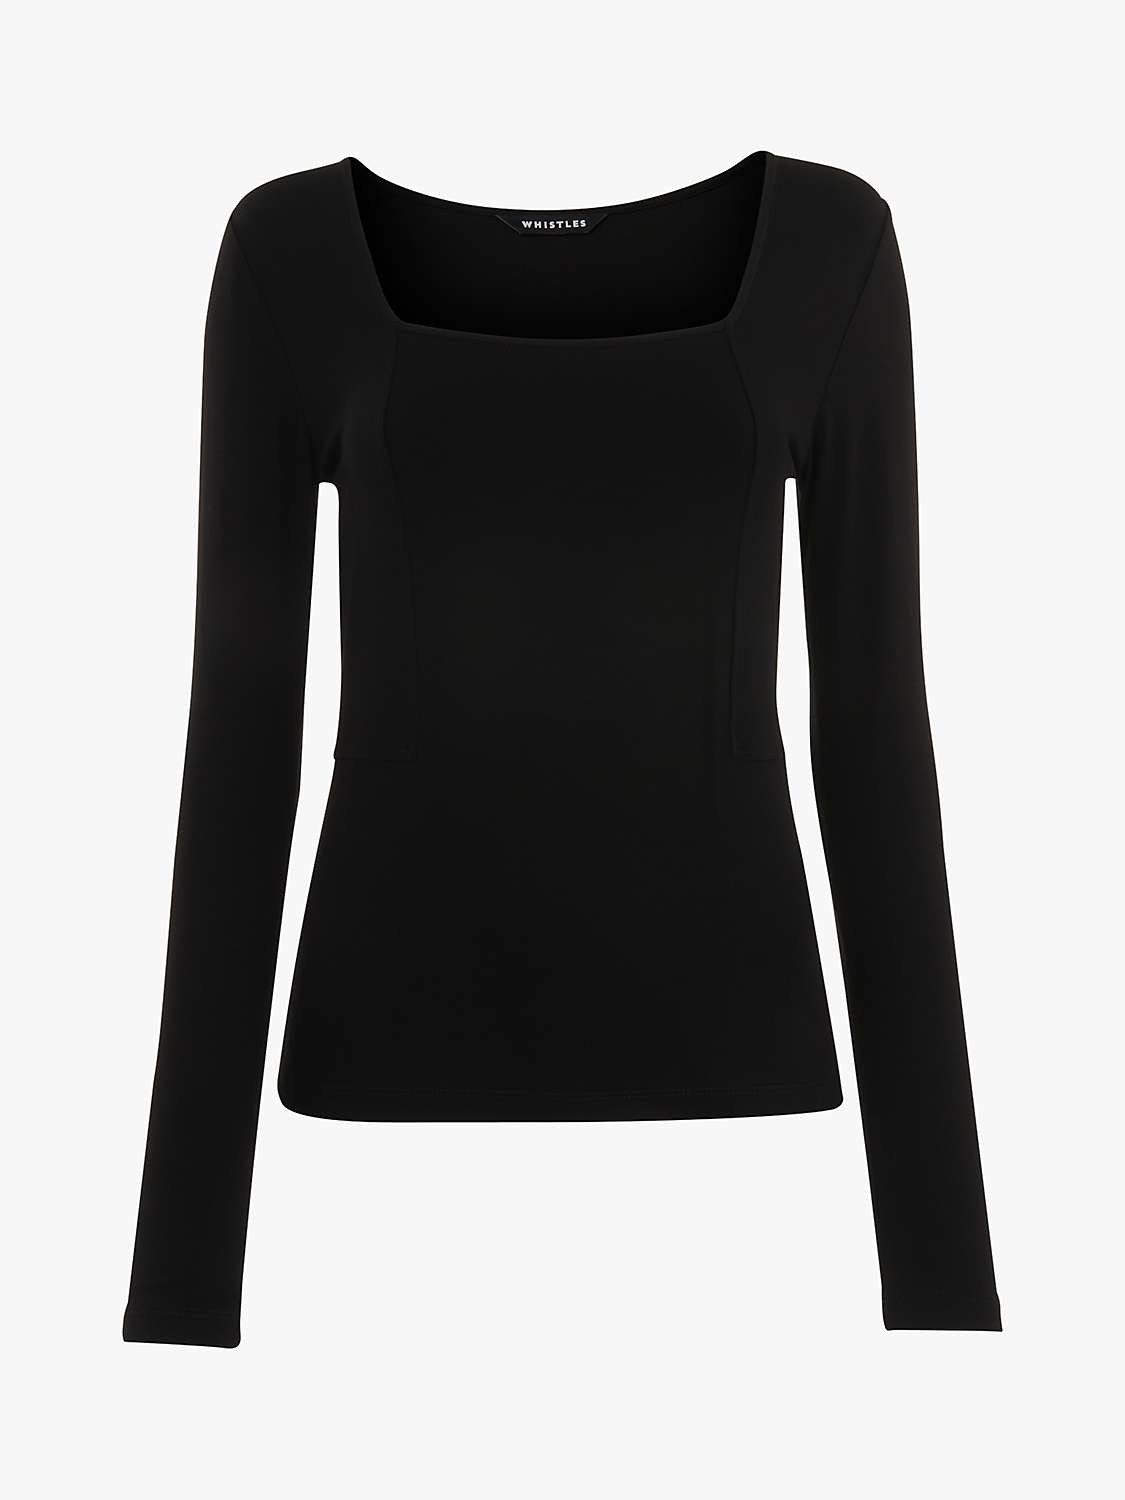 Buy Whistles Square Neck Long Sleeve Top Online at johnlewis.com